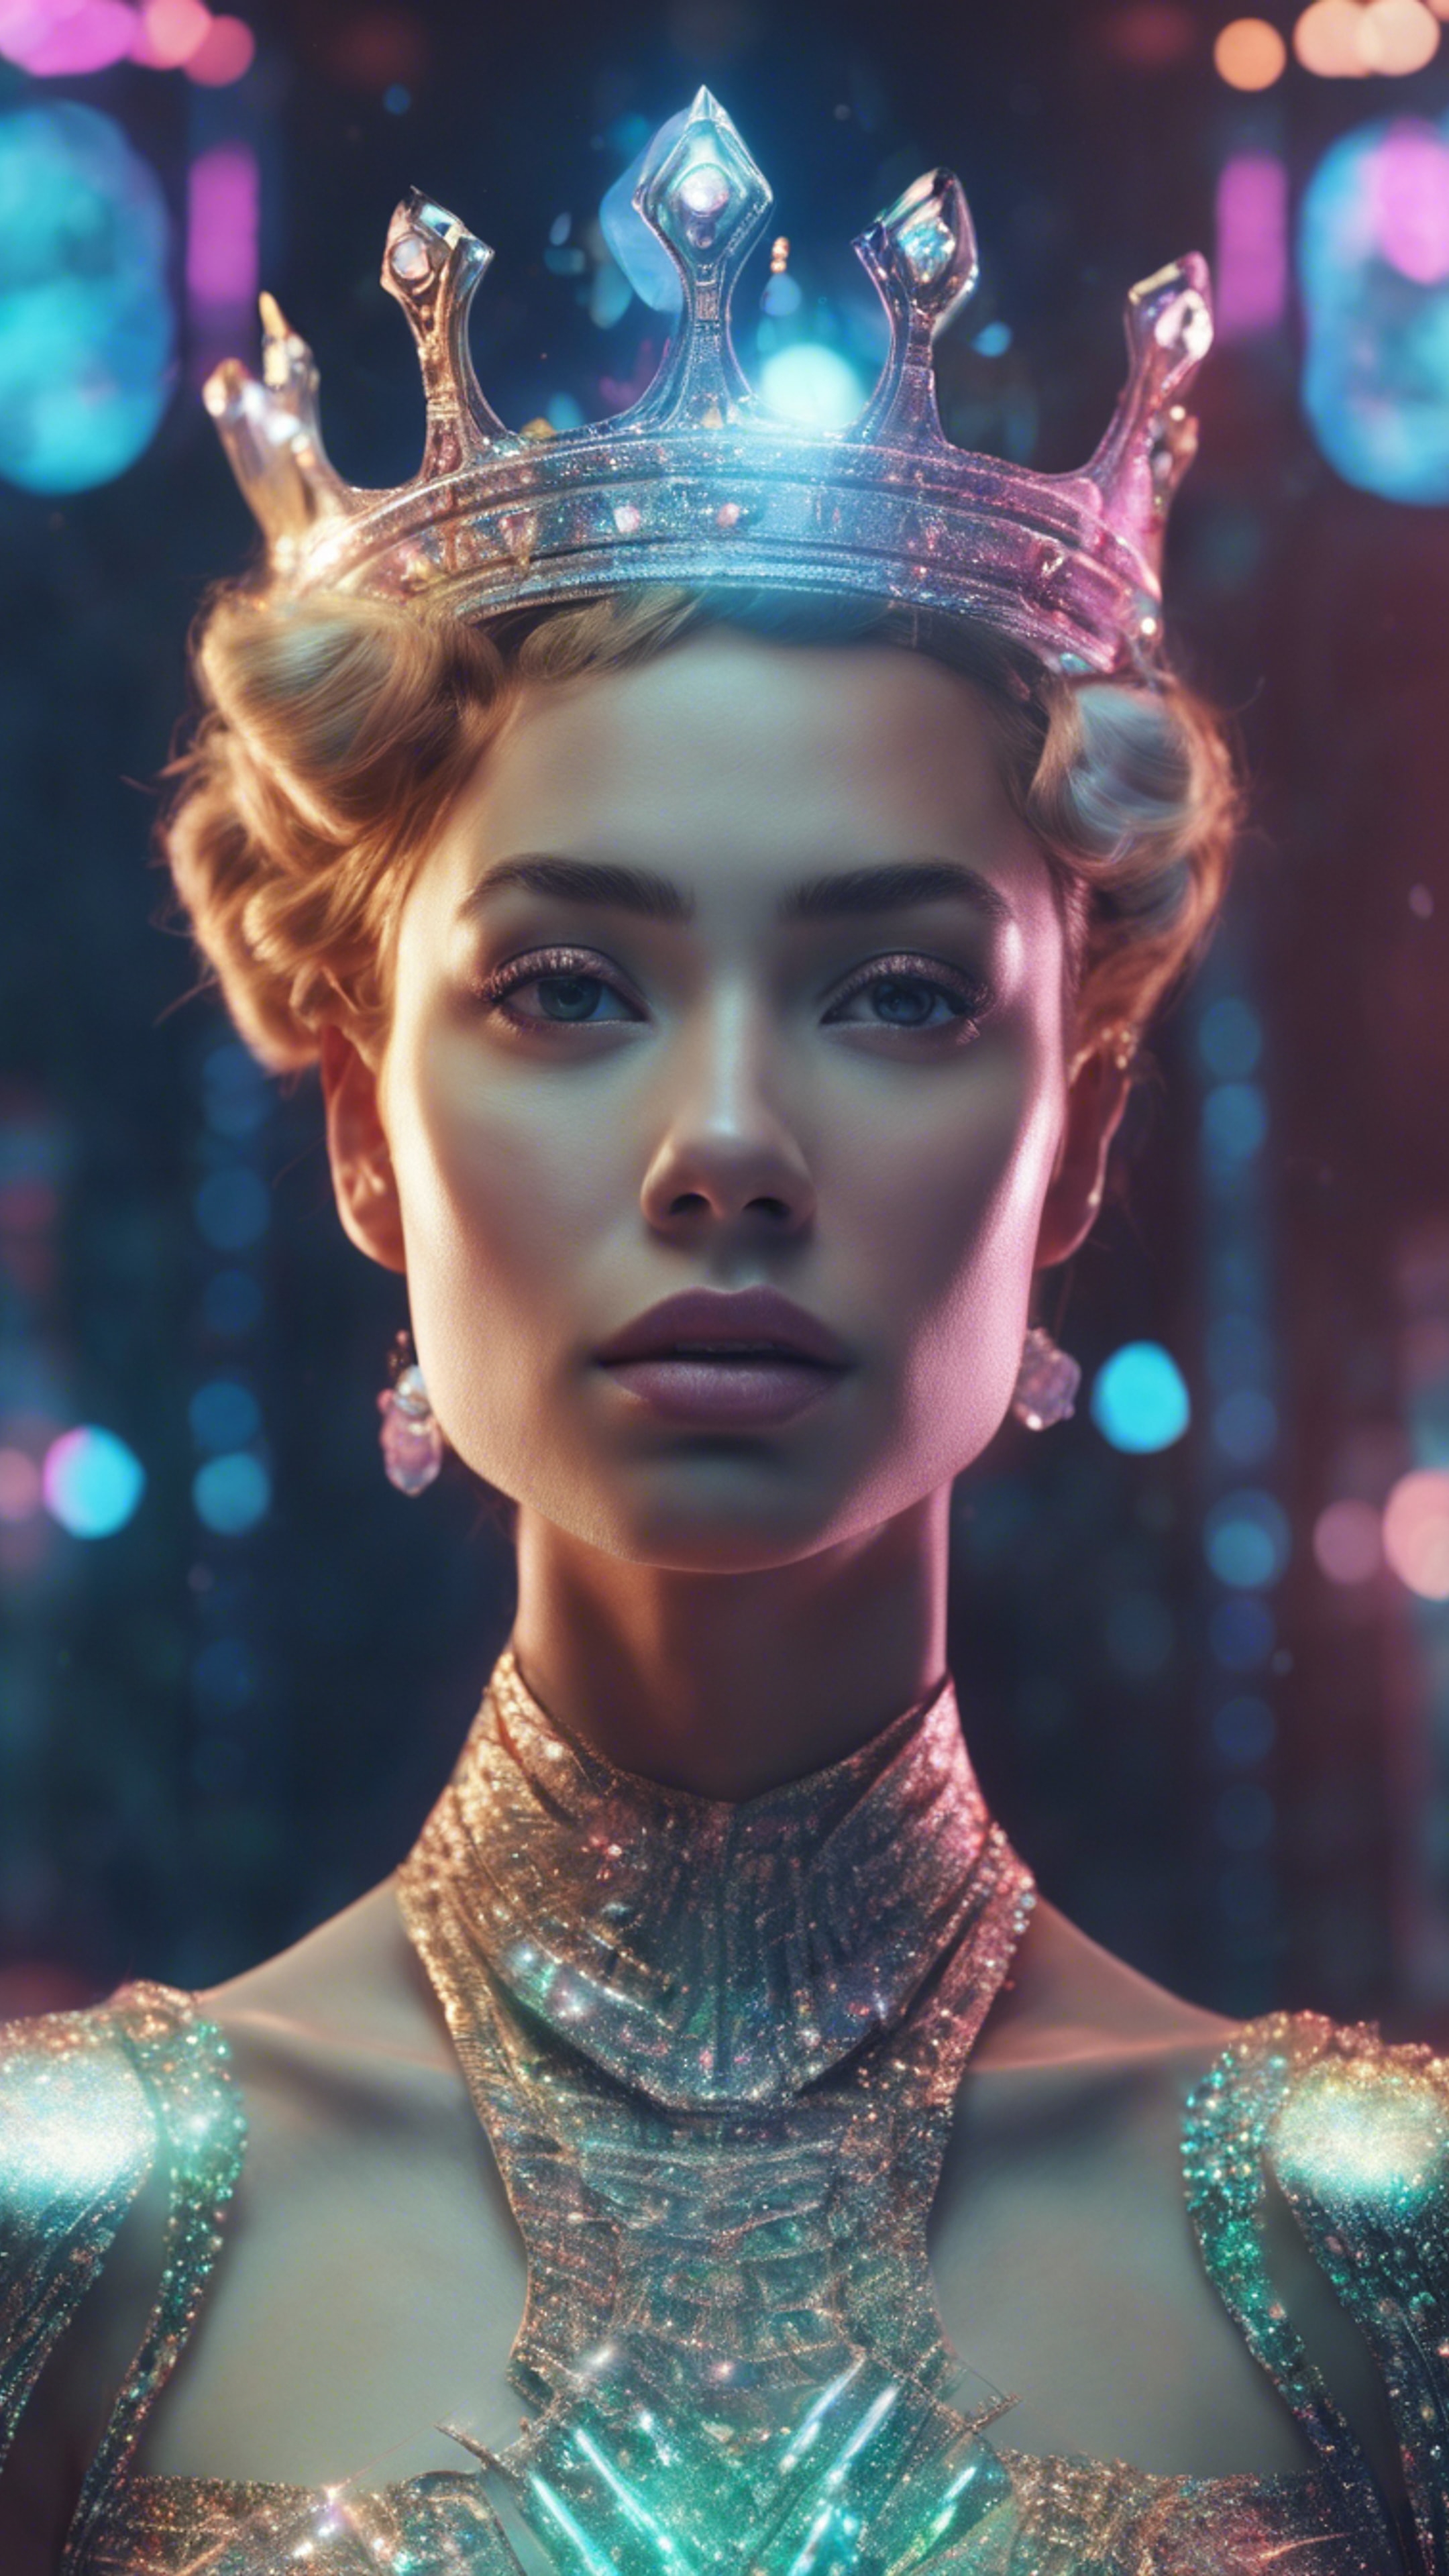 A holographic crown floating above a futuristic space queen, casting an extraterrestrial glow onto her regal features. Wallpaper[b8d757f5bf564fa98364]